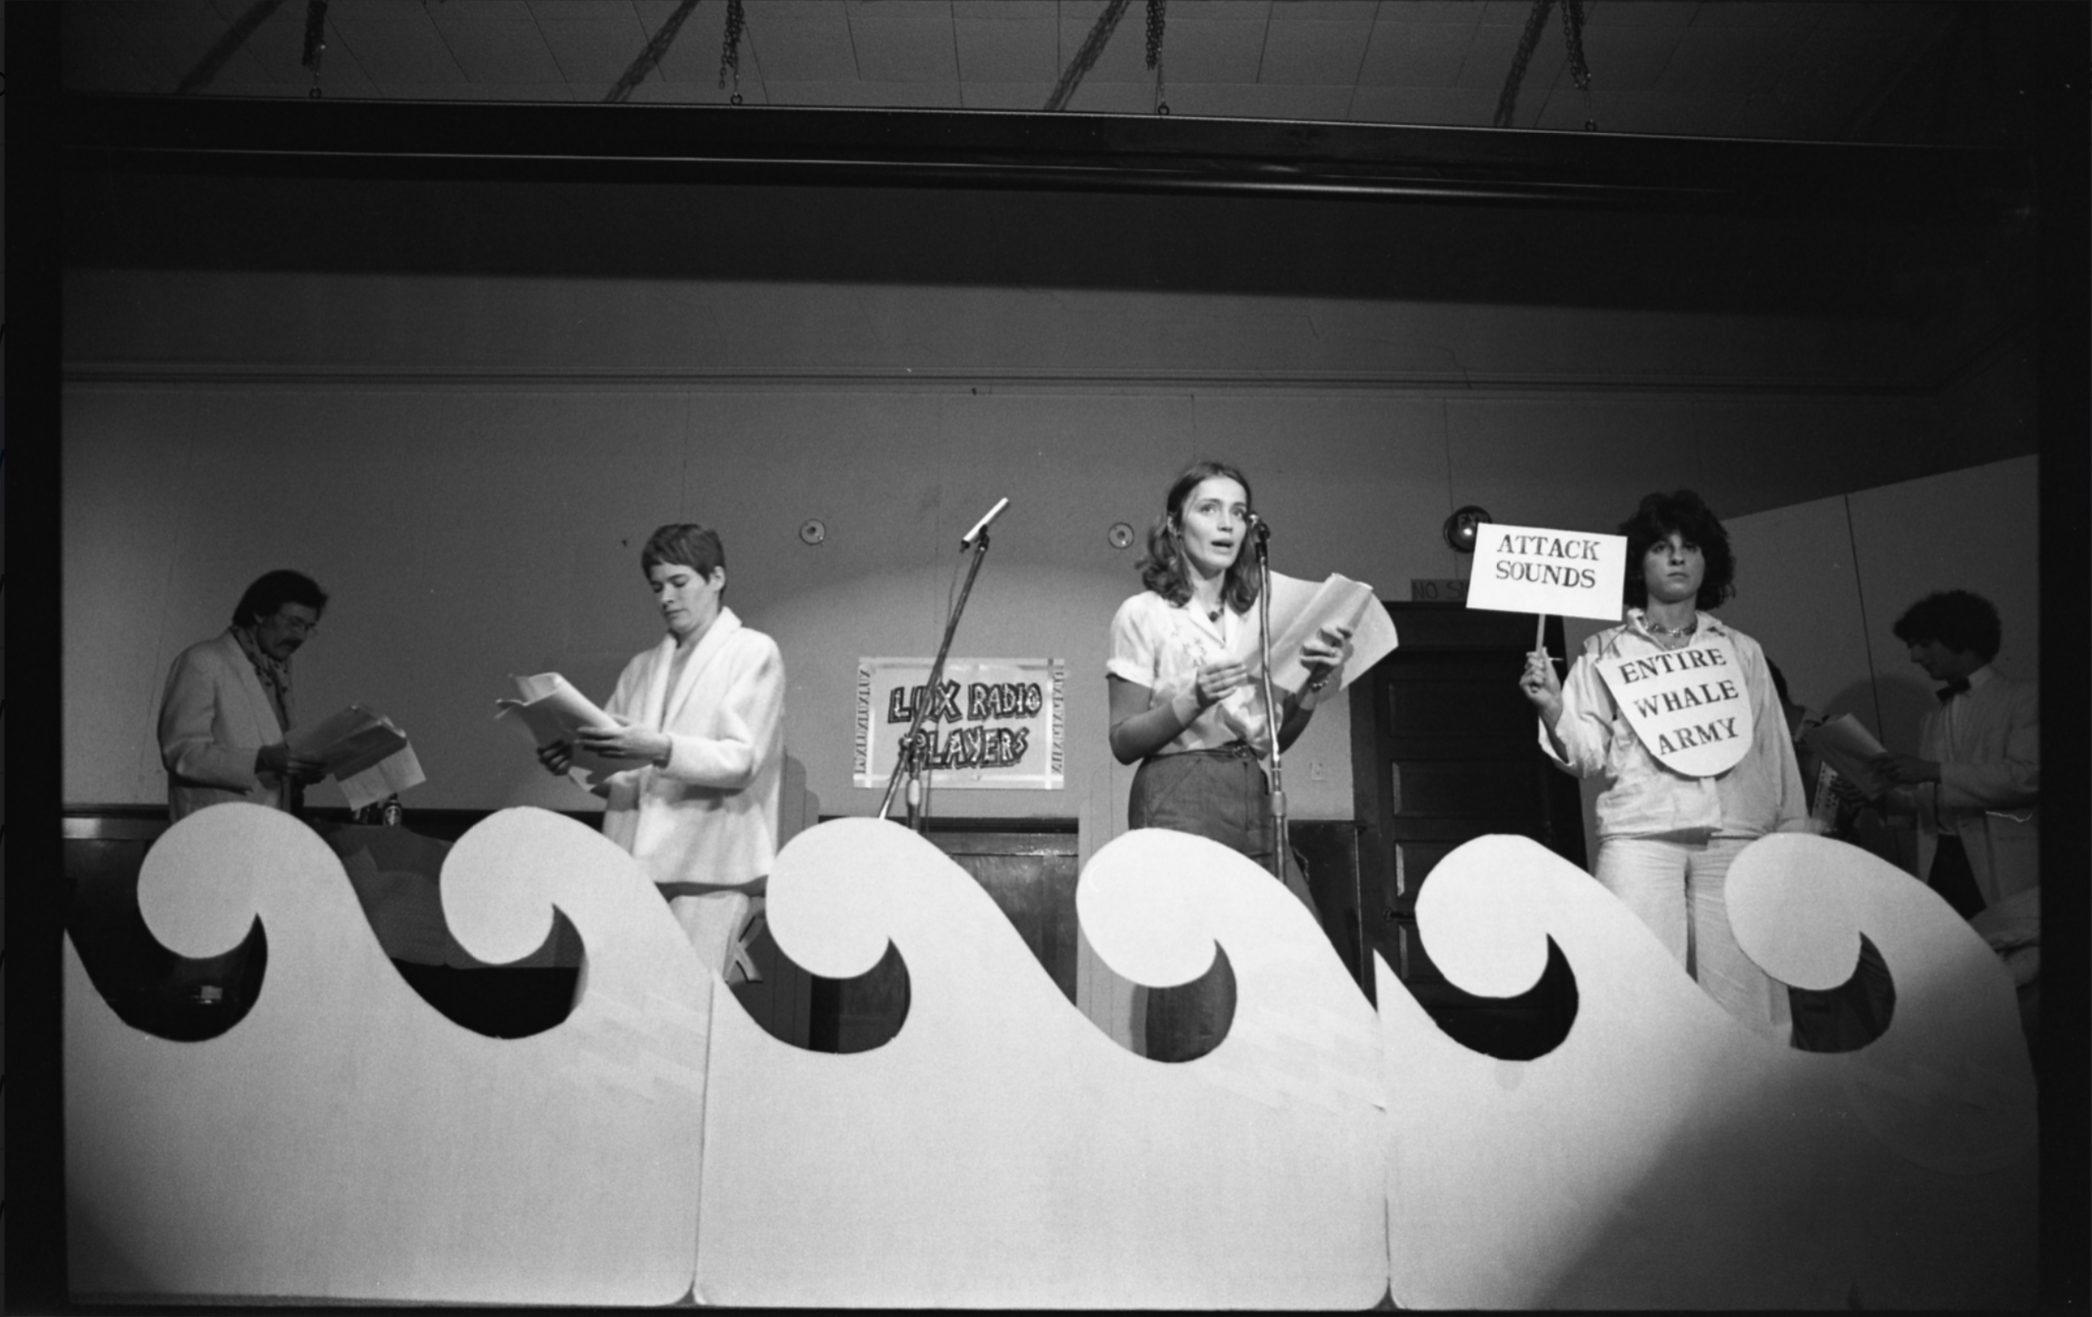 A black and white photograph in which four performers stand in a row behind cardboard cut-outs of ocean waves. Robert Amussen and Kate Craig look down at scripts, while Suzanne Ksinan stands in a spotlight and recites. Martha Miller looks holds a sign that reads “Attack Sounds” and wears another sign on her chest that reads “Entire Whale Army.”